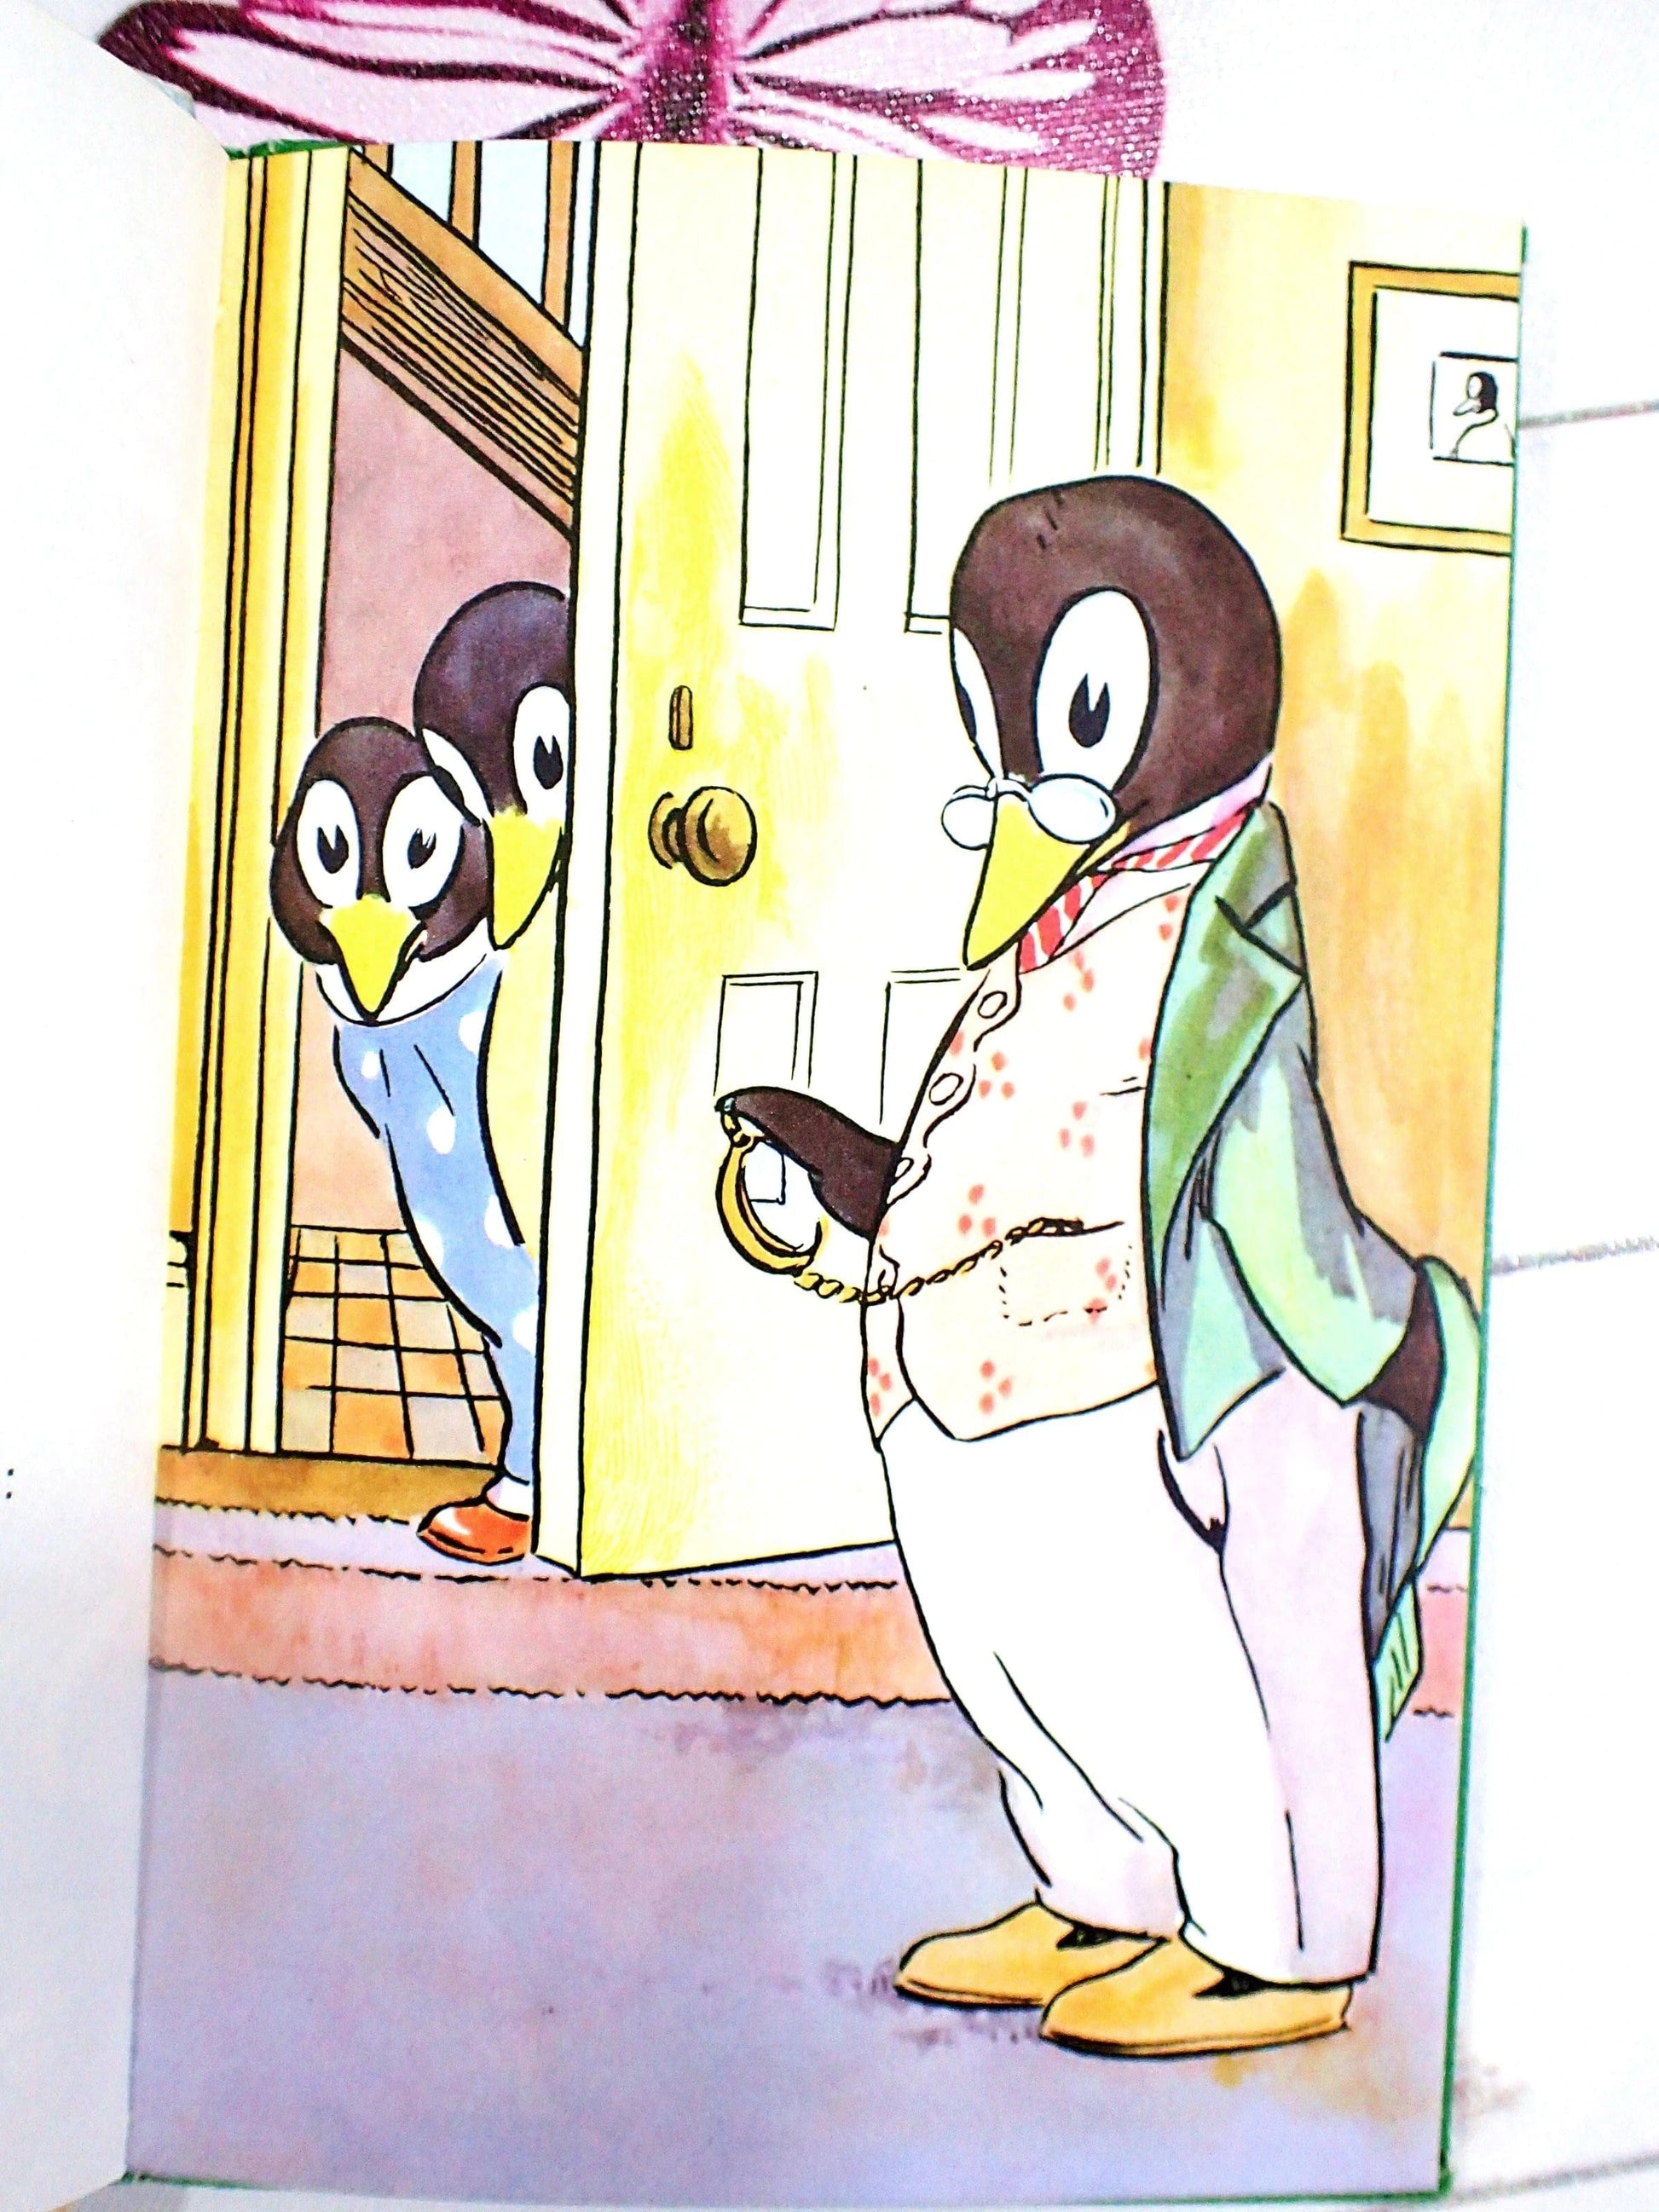 Daddy Penguin in old fashioned clothes looking at a pocket watch.